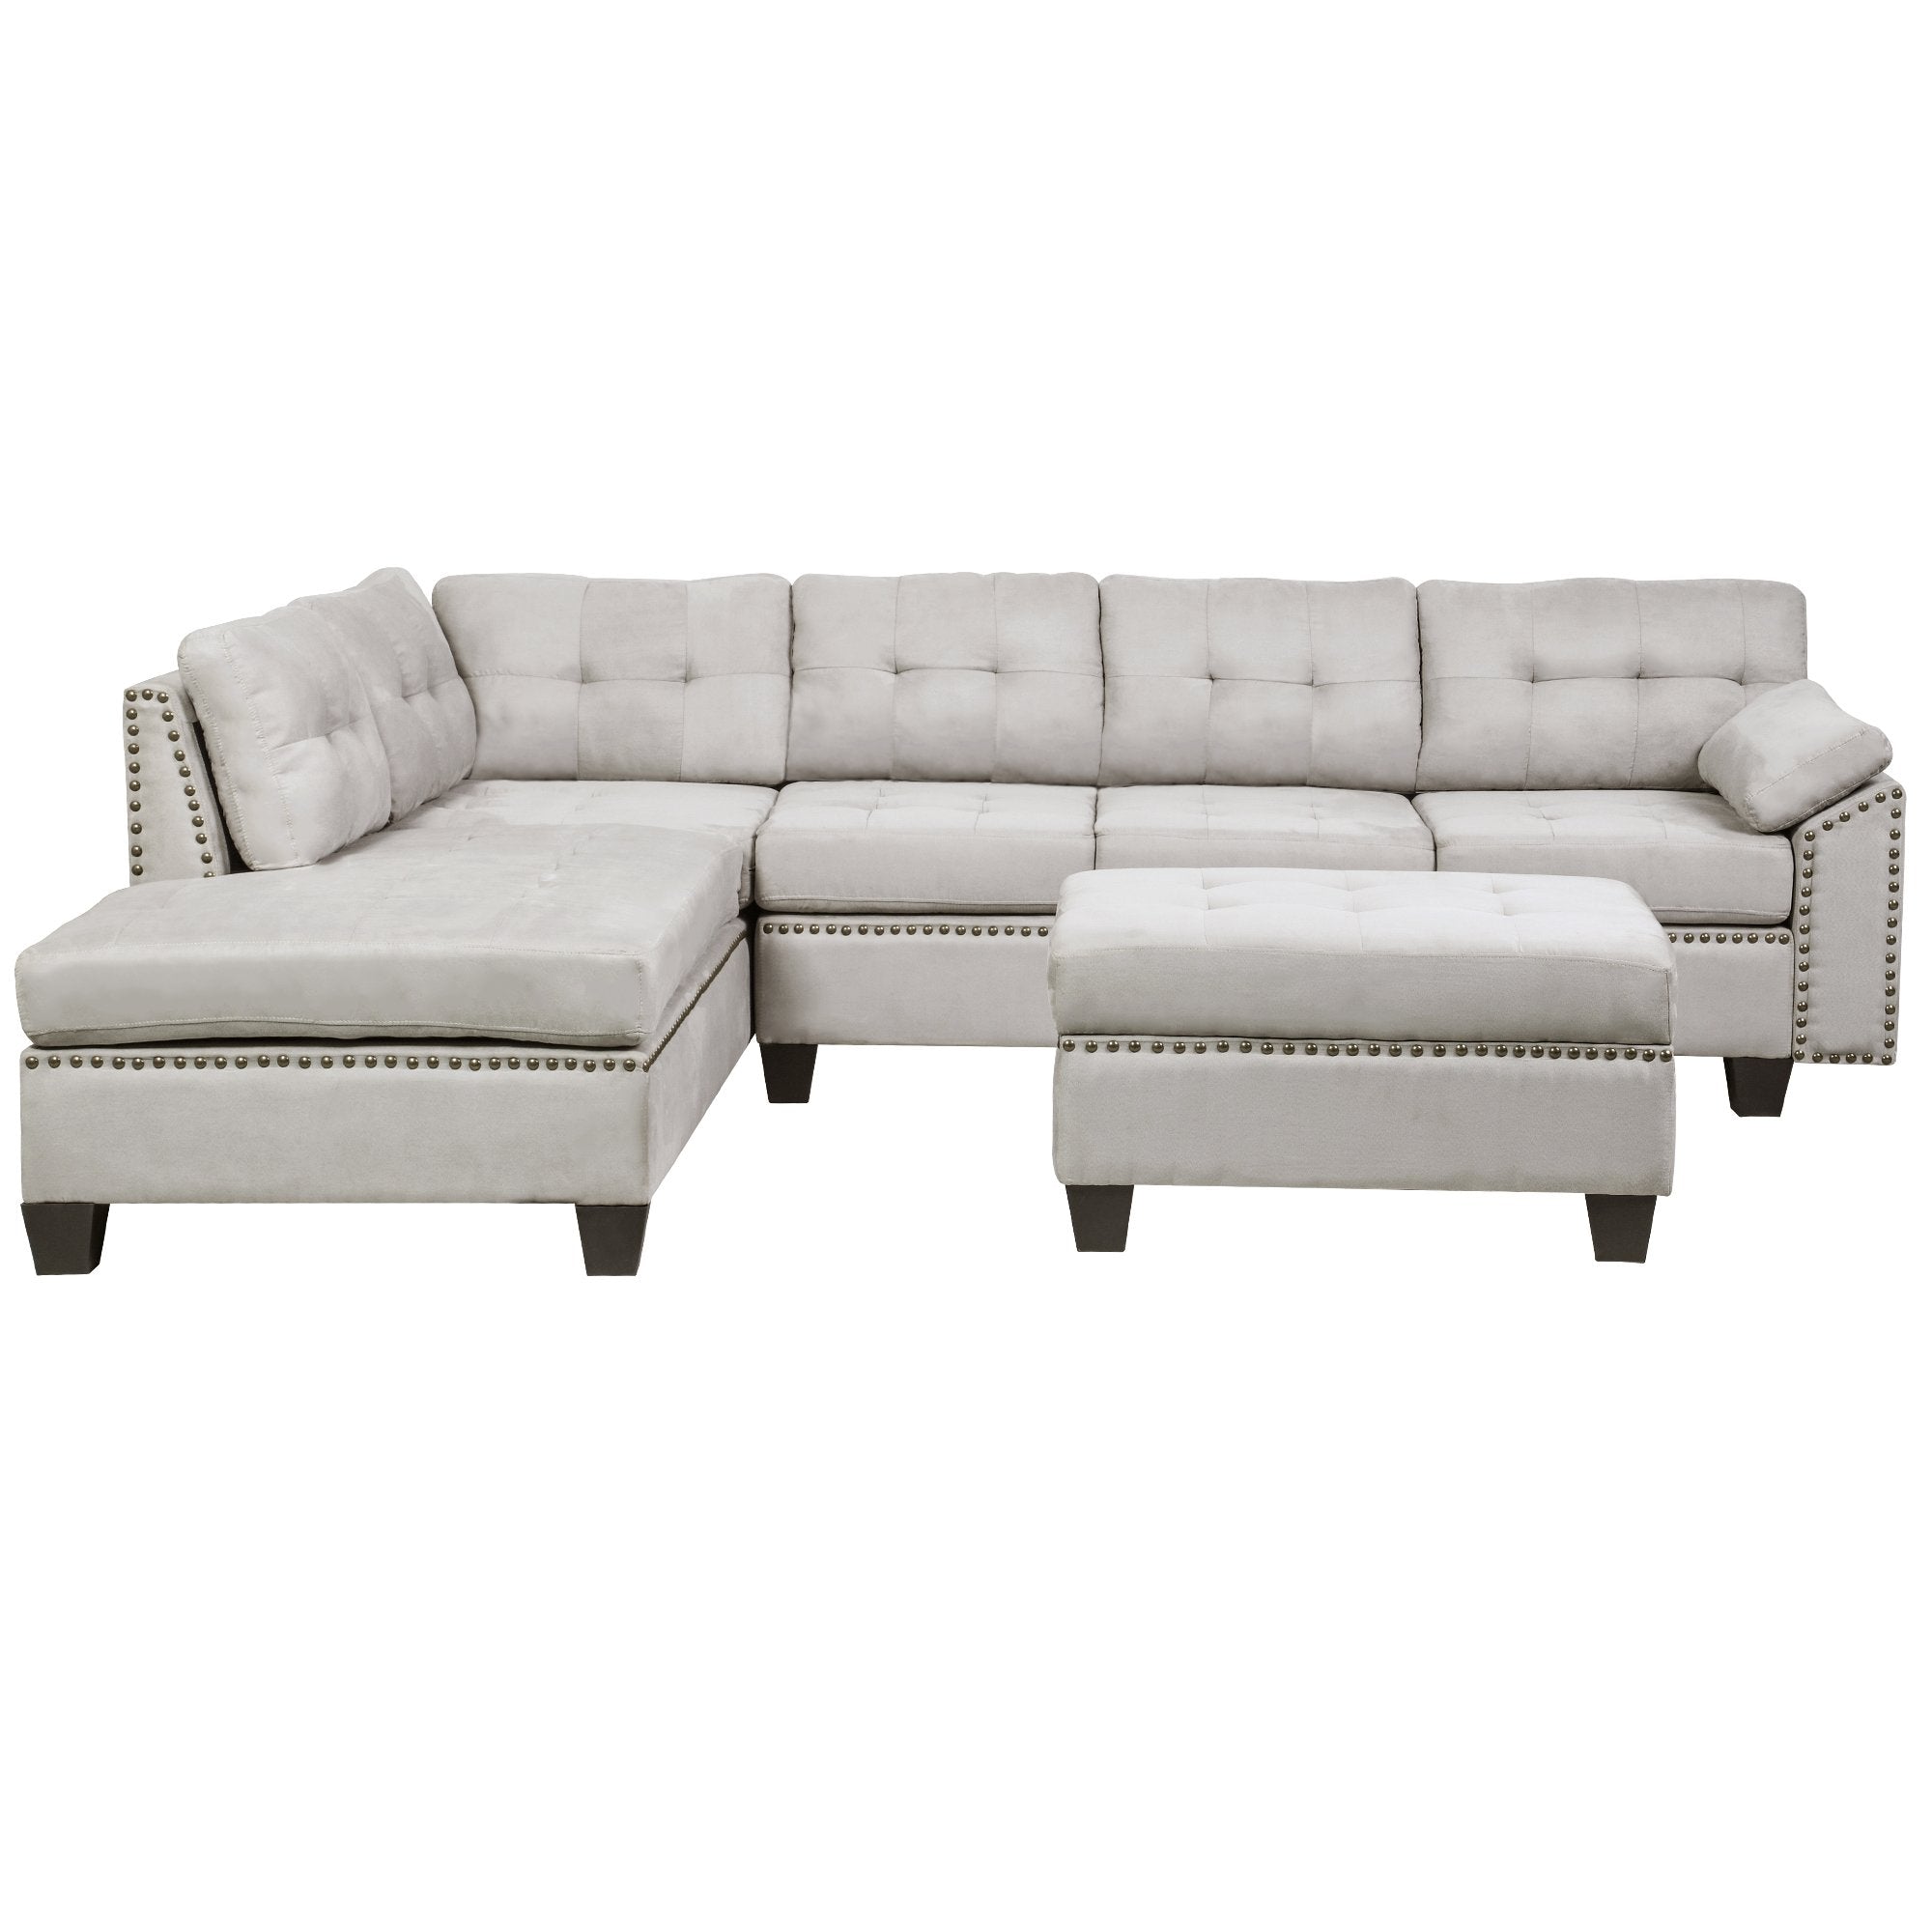 Sectional Sofa Set with Chaise Lounge and Storage Ottoman Nail Head Detail (Grey)